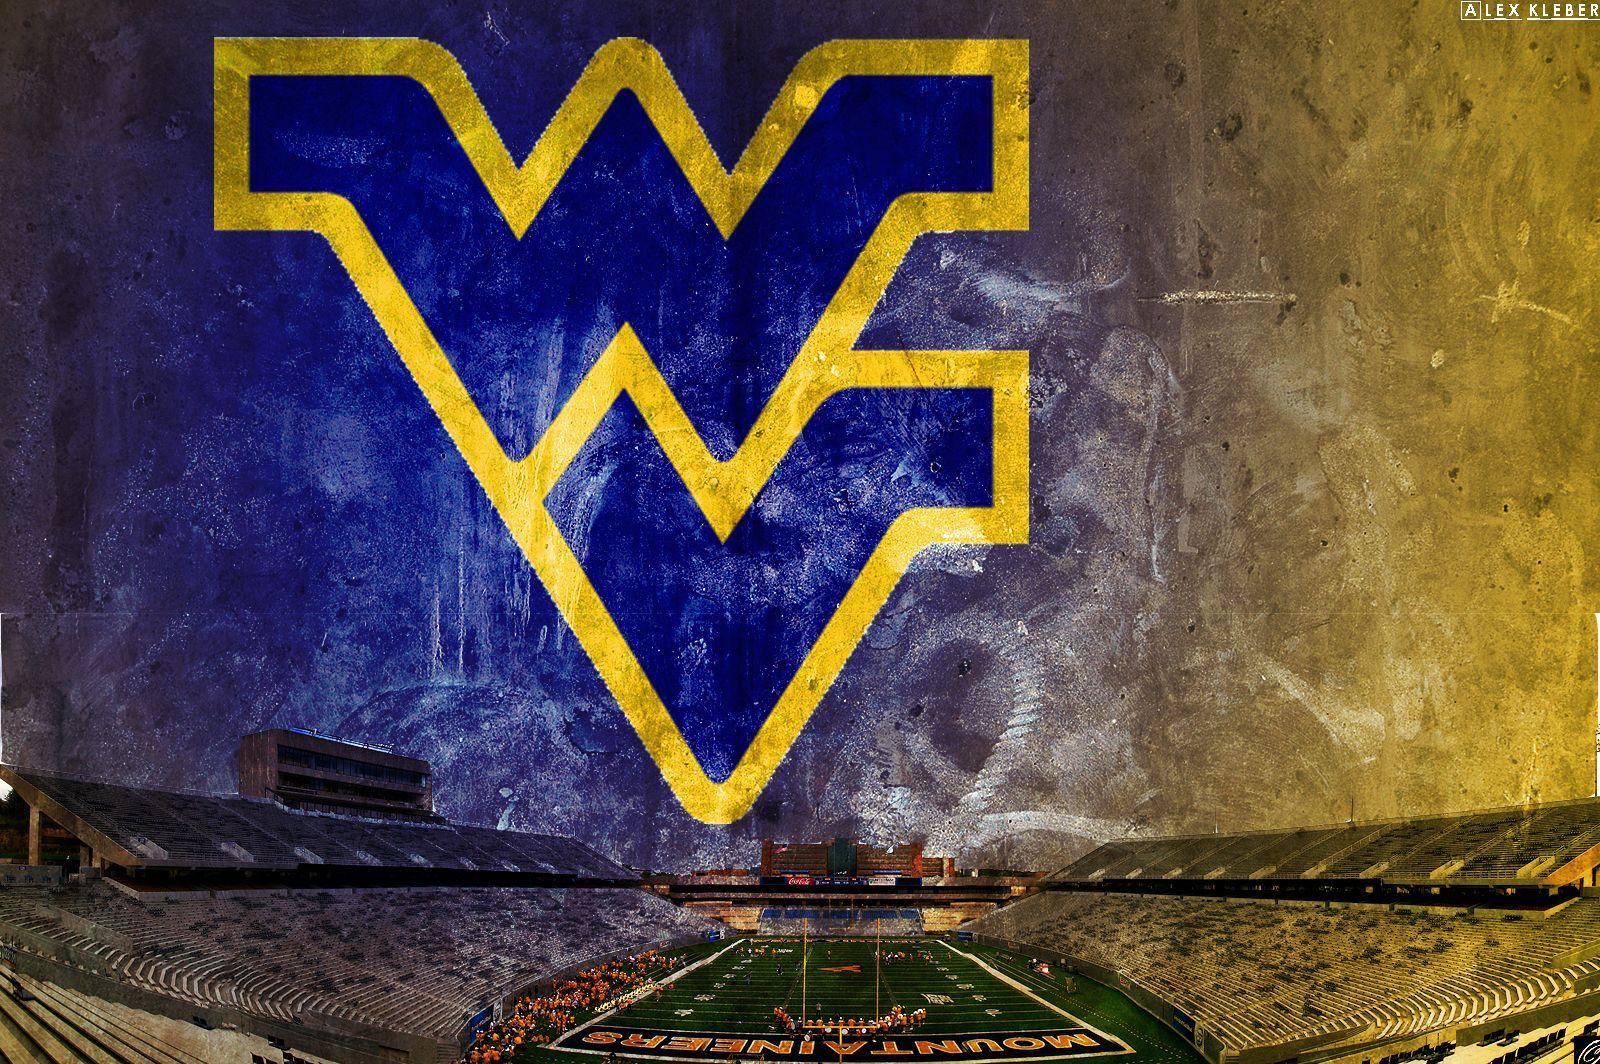 picture of wvu mountaineers. WVU Wallpaper by klebz. Things I